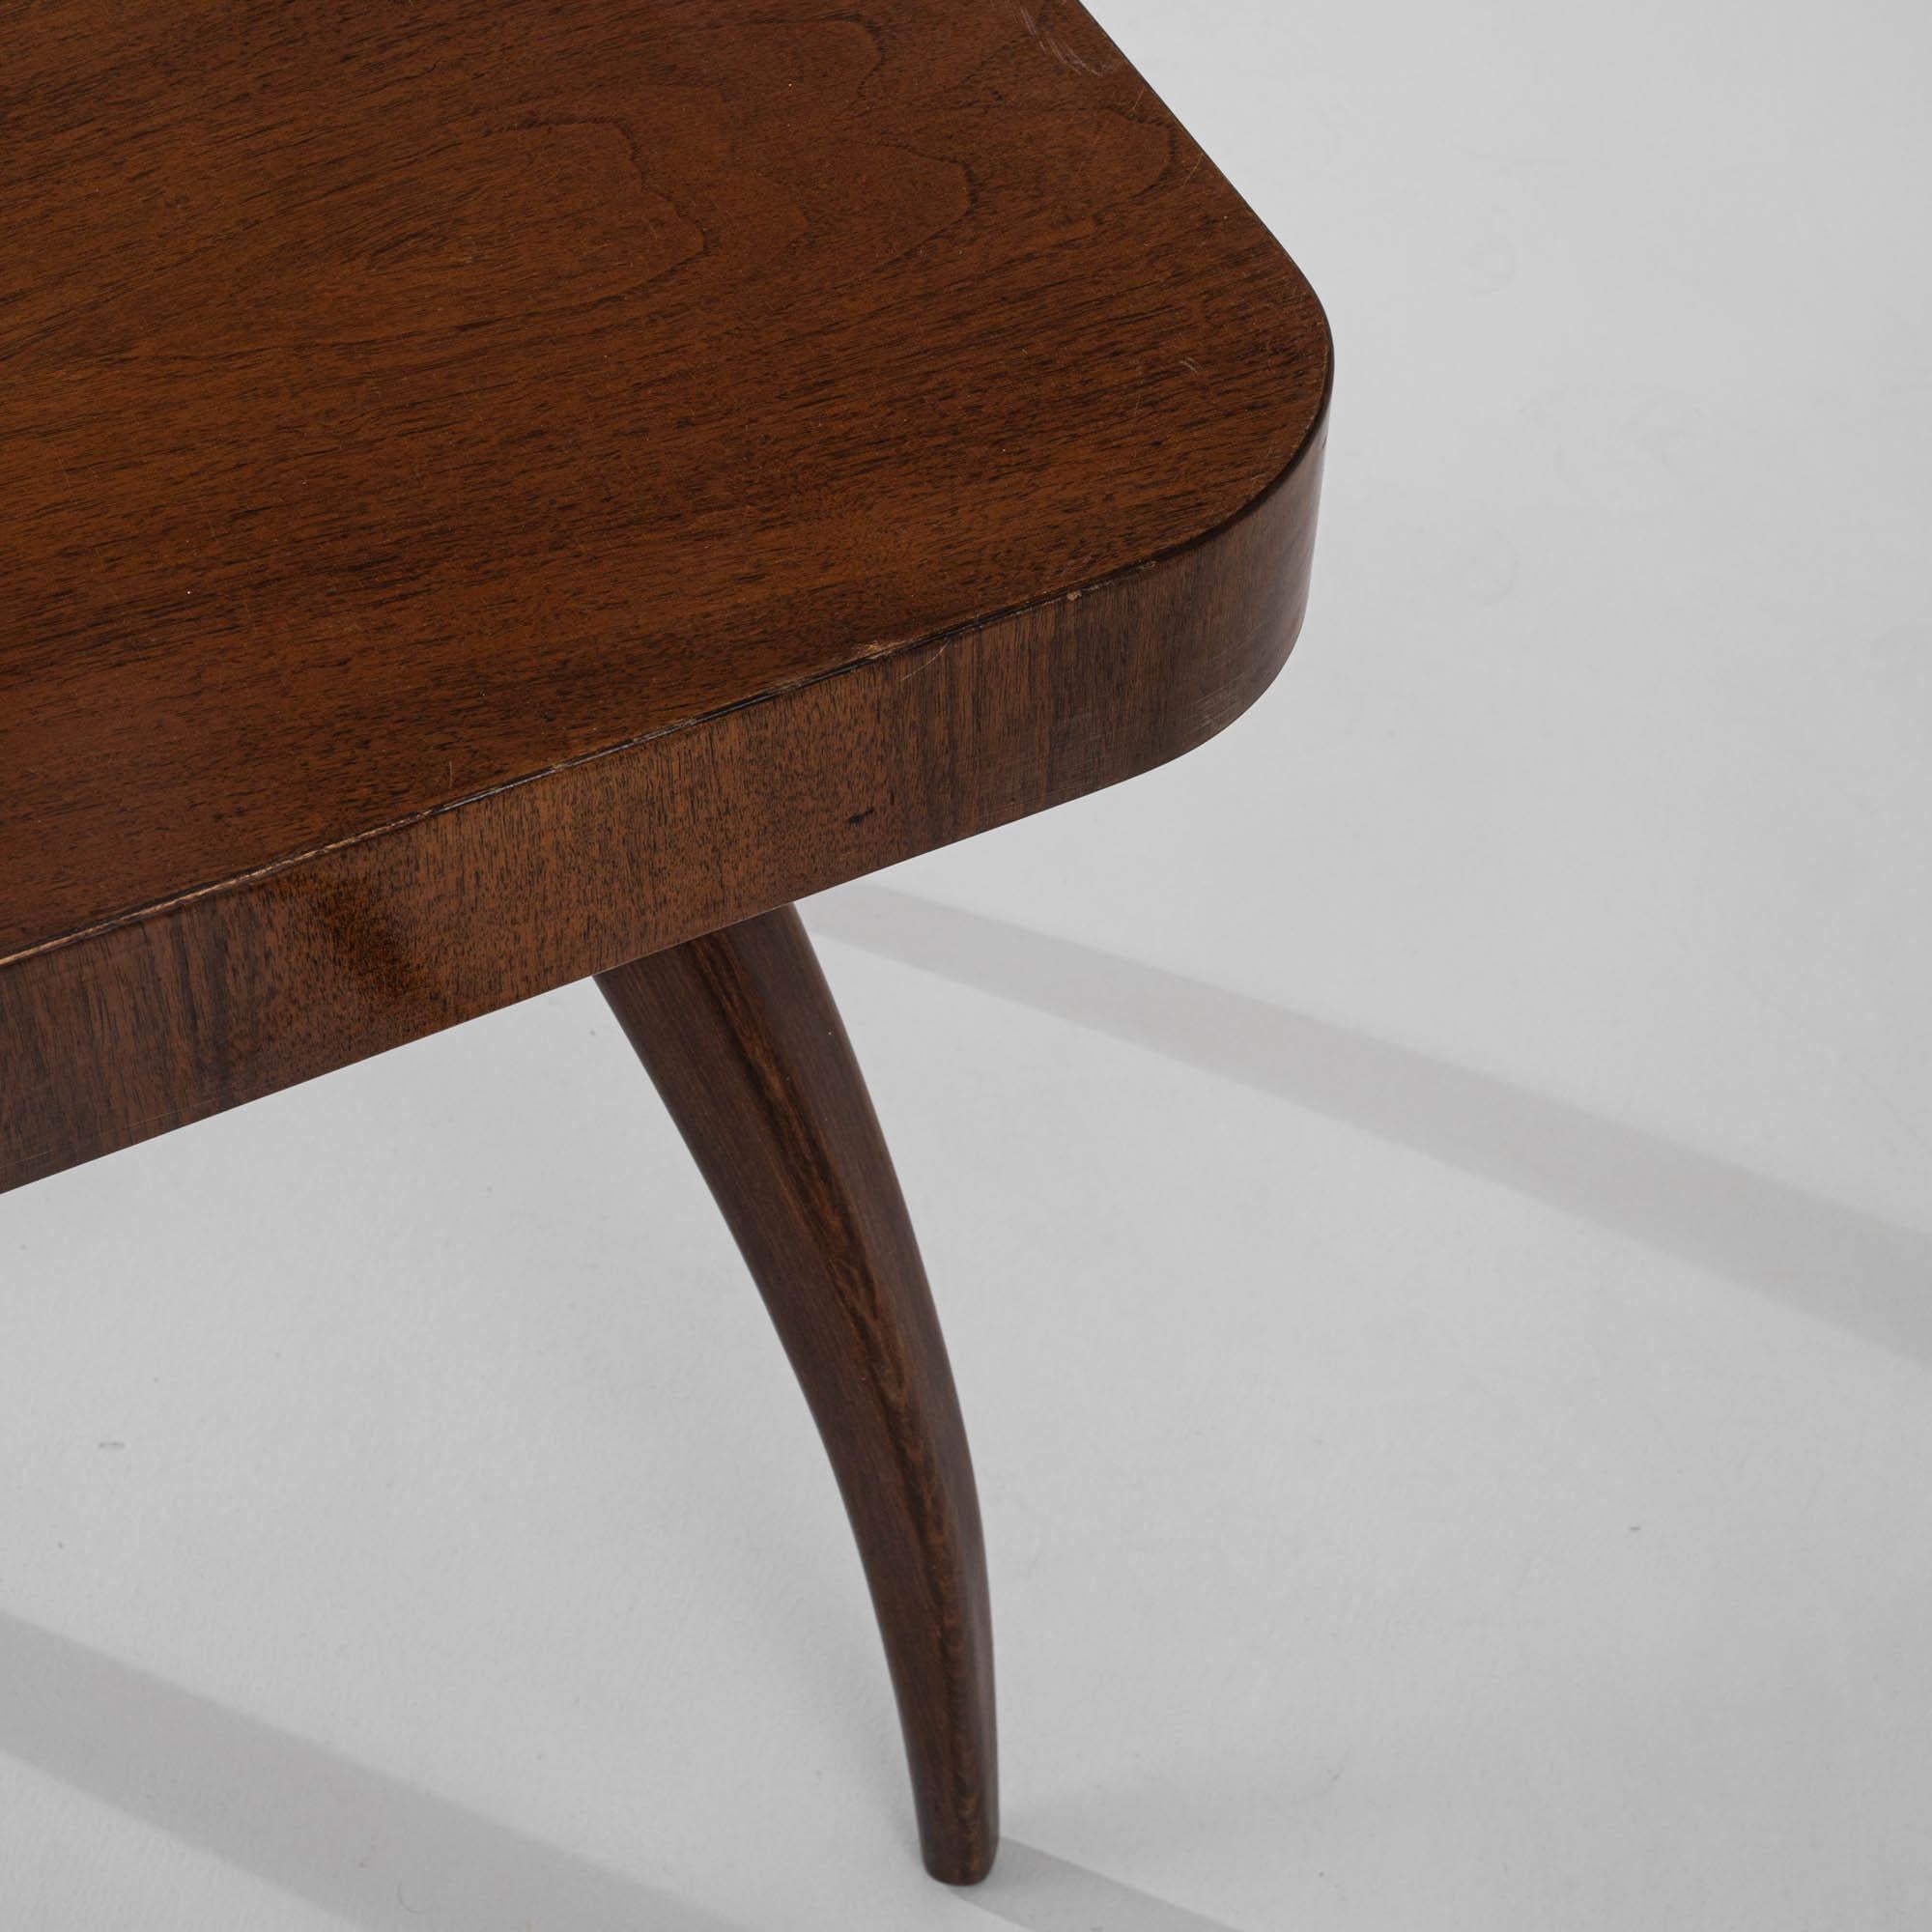 20th Century H259 Spider Table by Jindrich Halabala